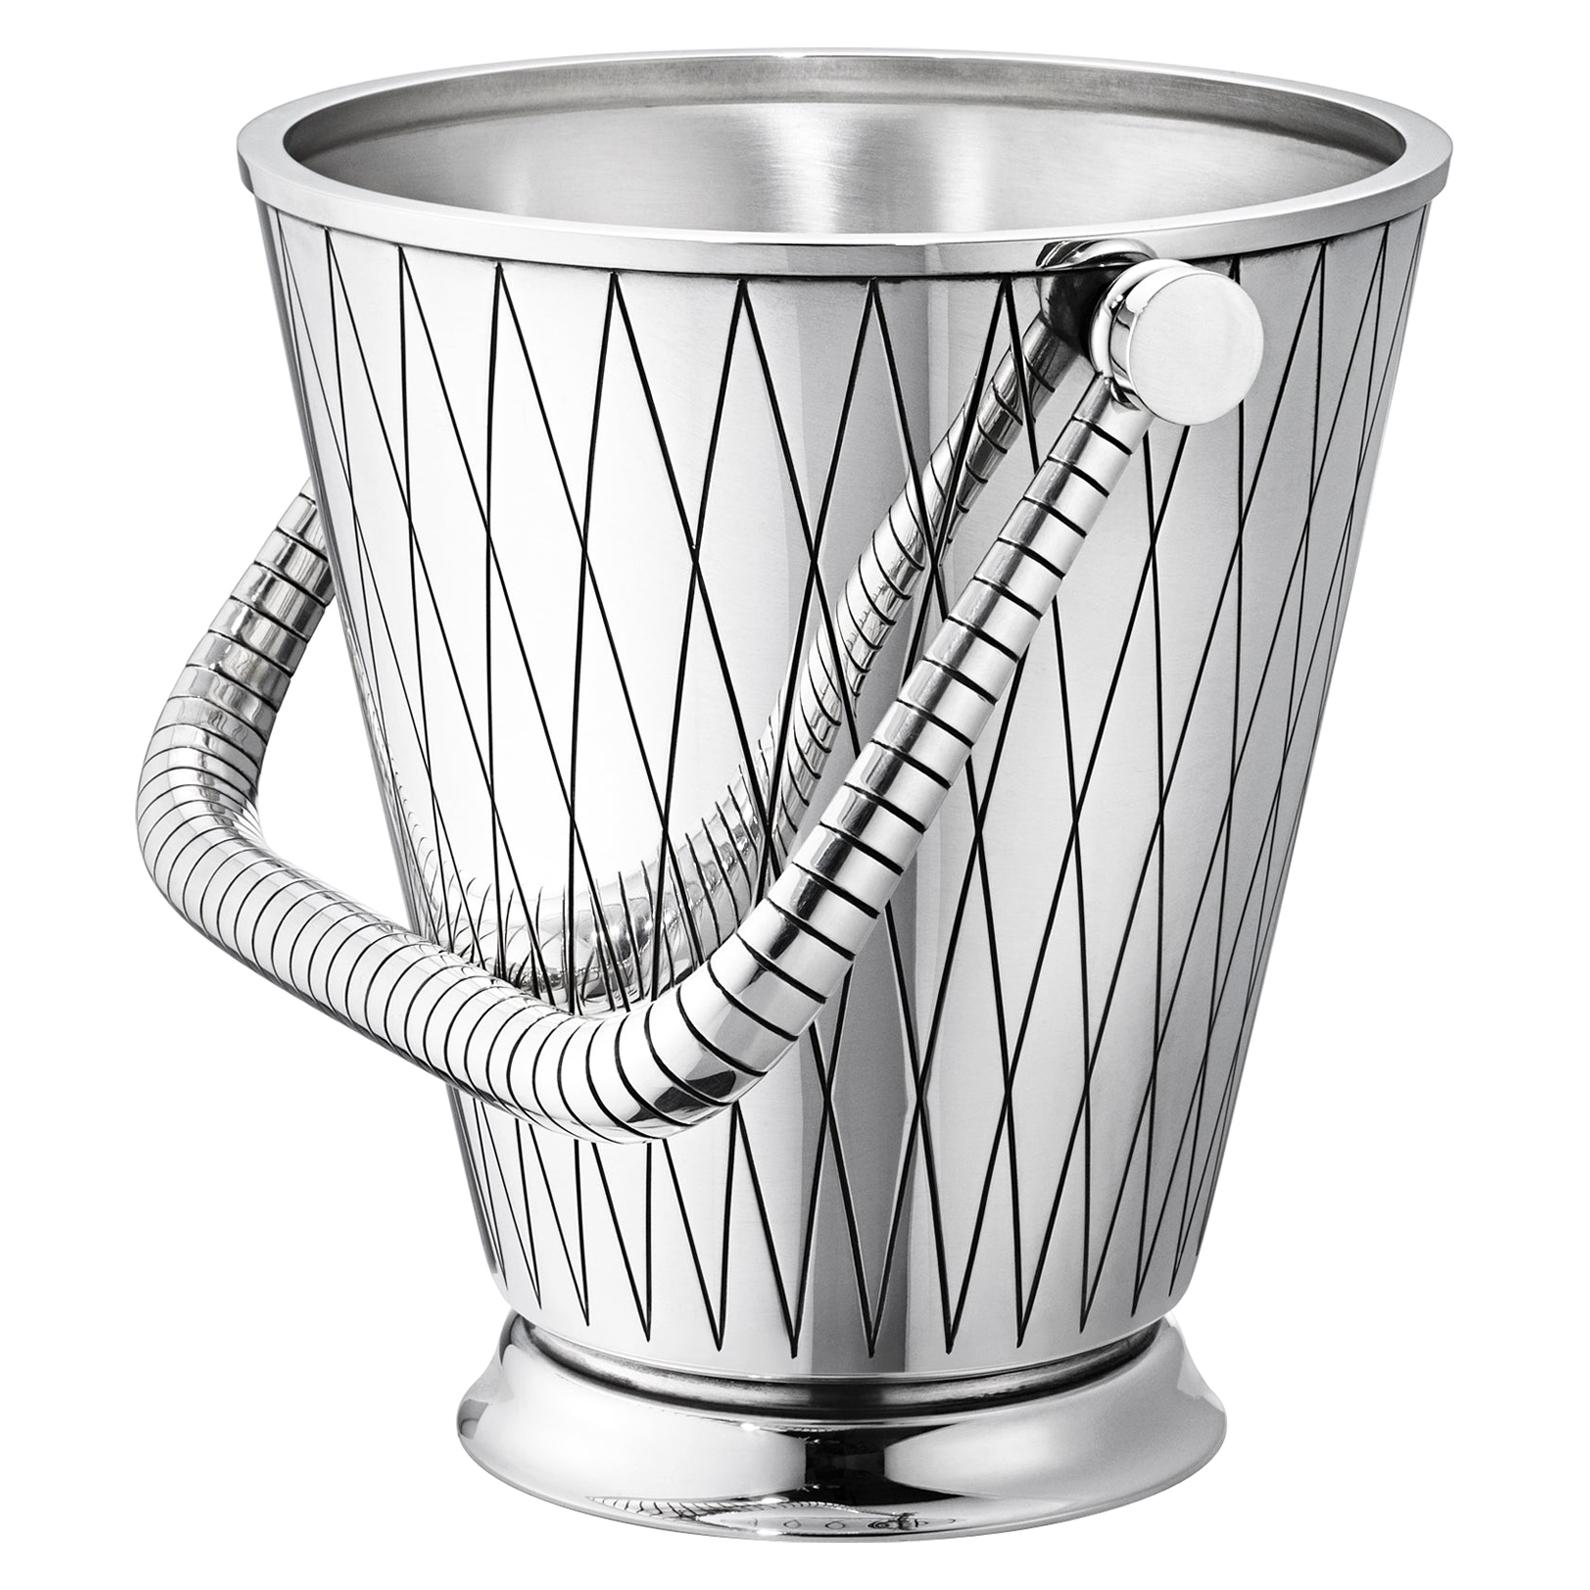 Georg Jensen 819D Handcrafted Sterling Silver Ice Bucket by Sigvard Bernadotte For Sale